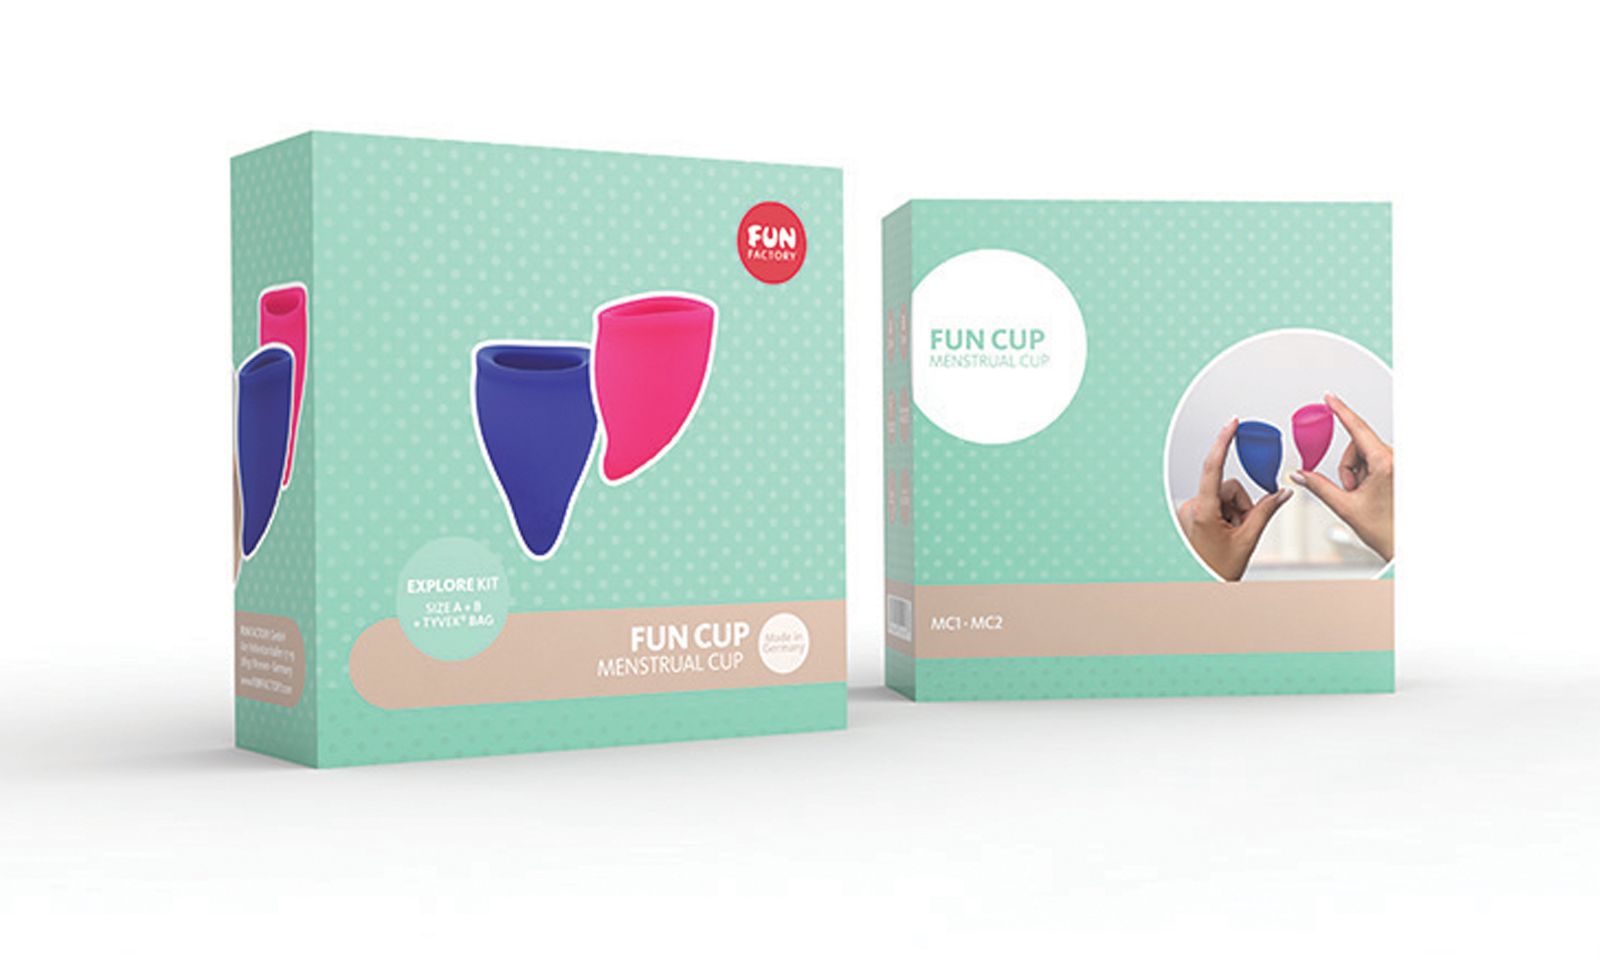 Entrenue Tapped As Exclusive Distributor of Fun Factory Fun Cup